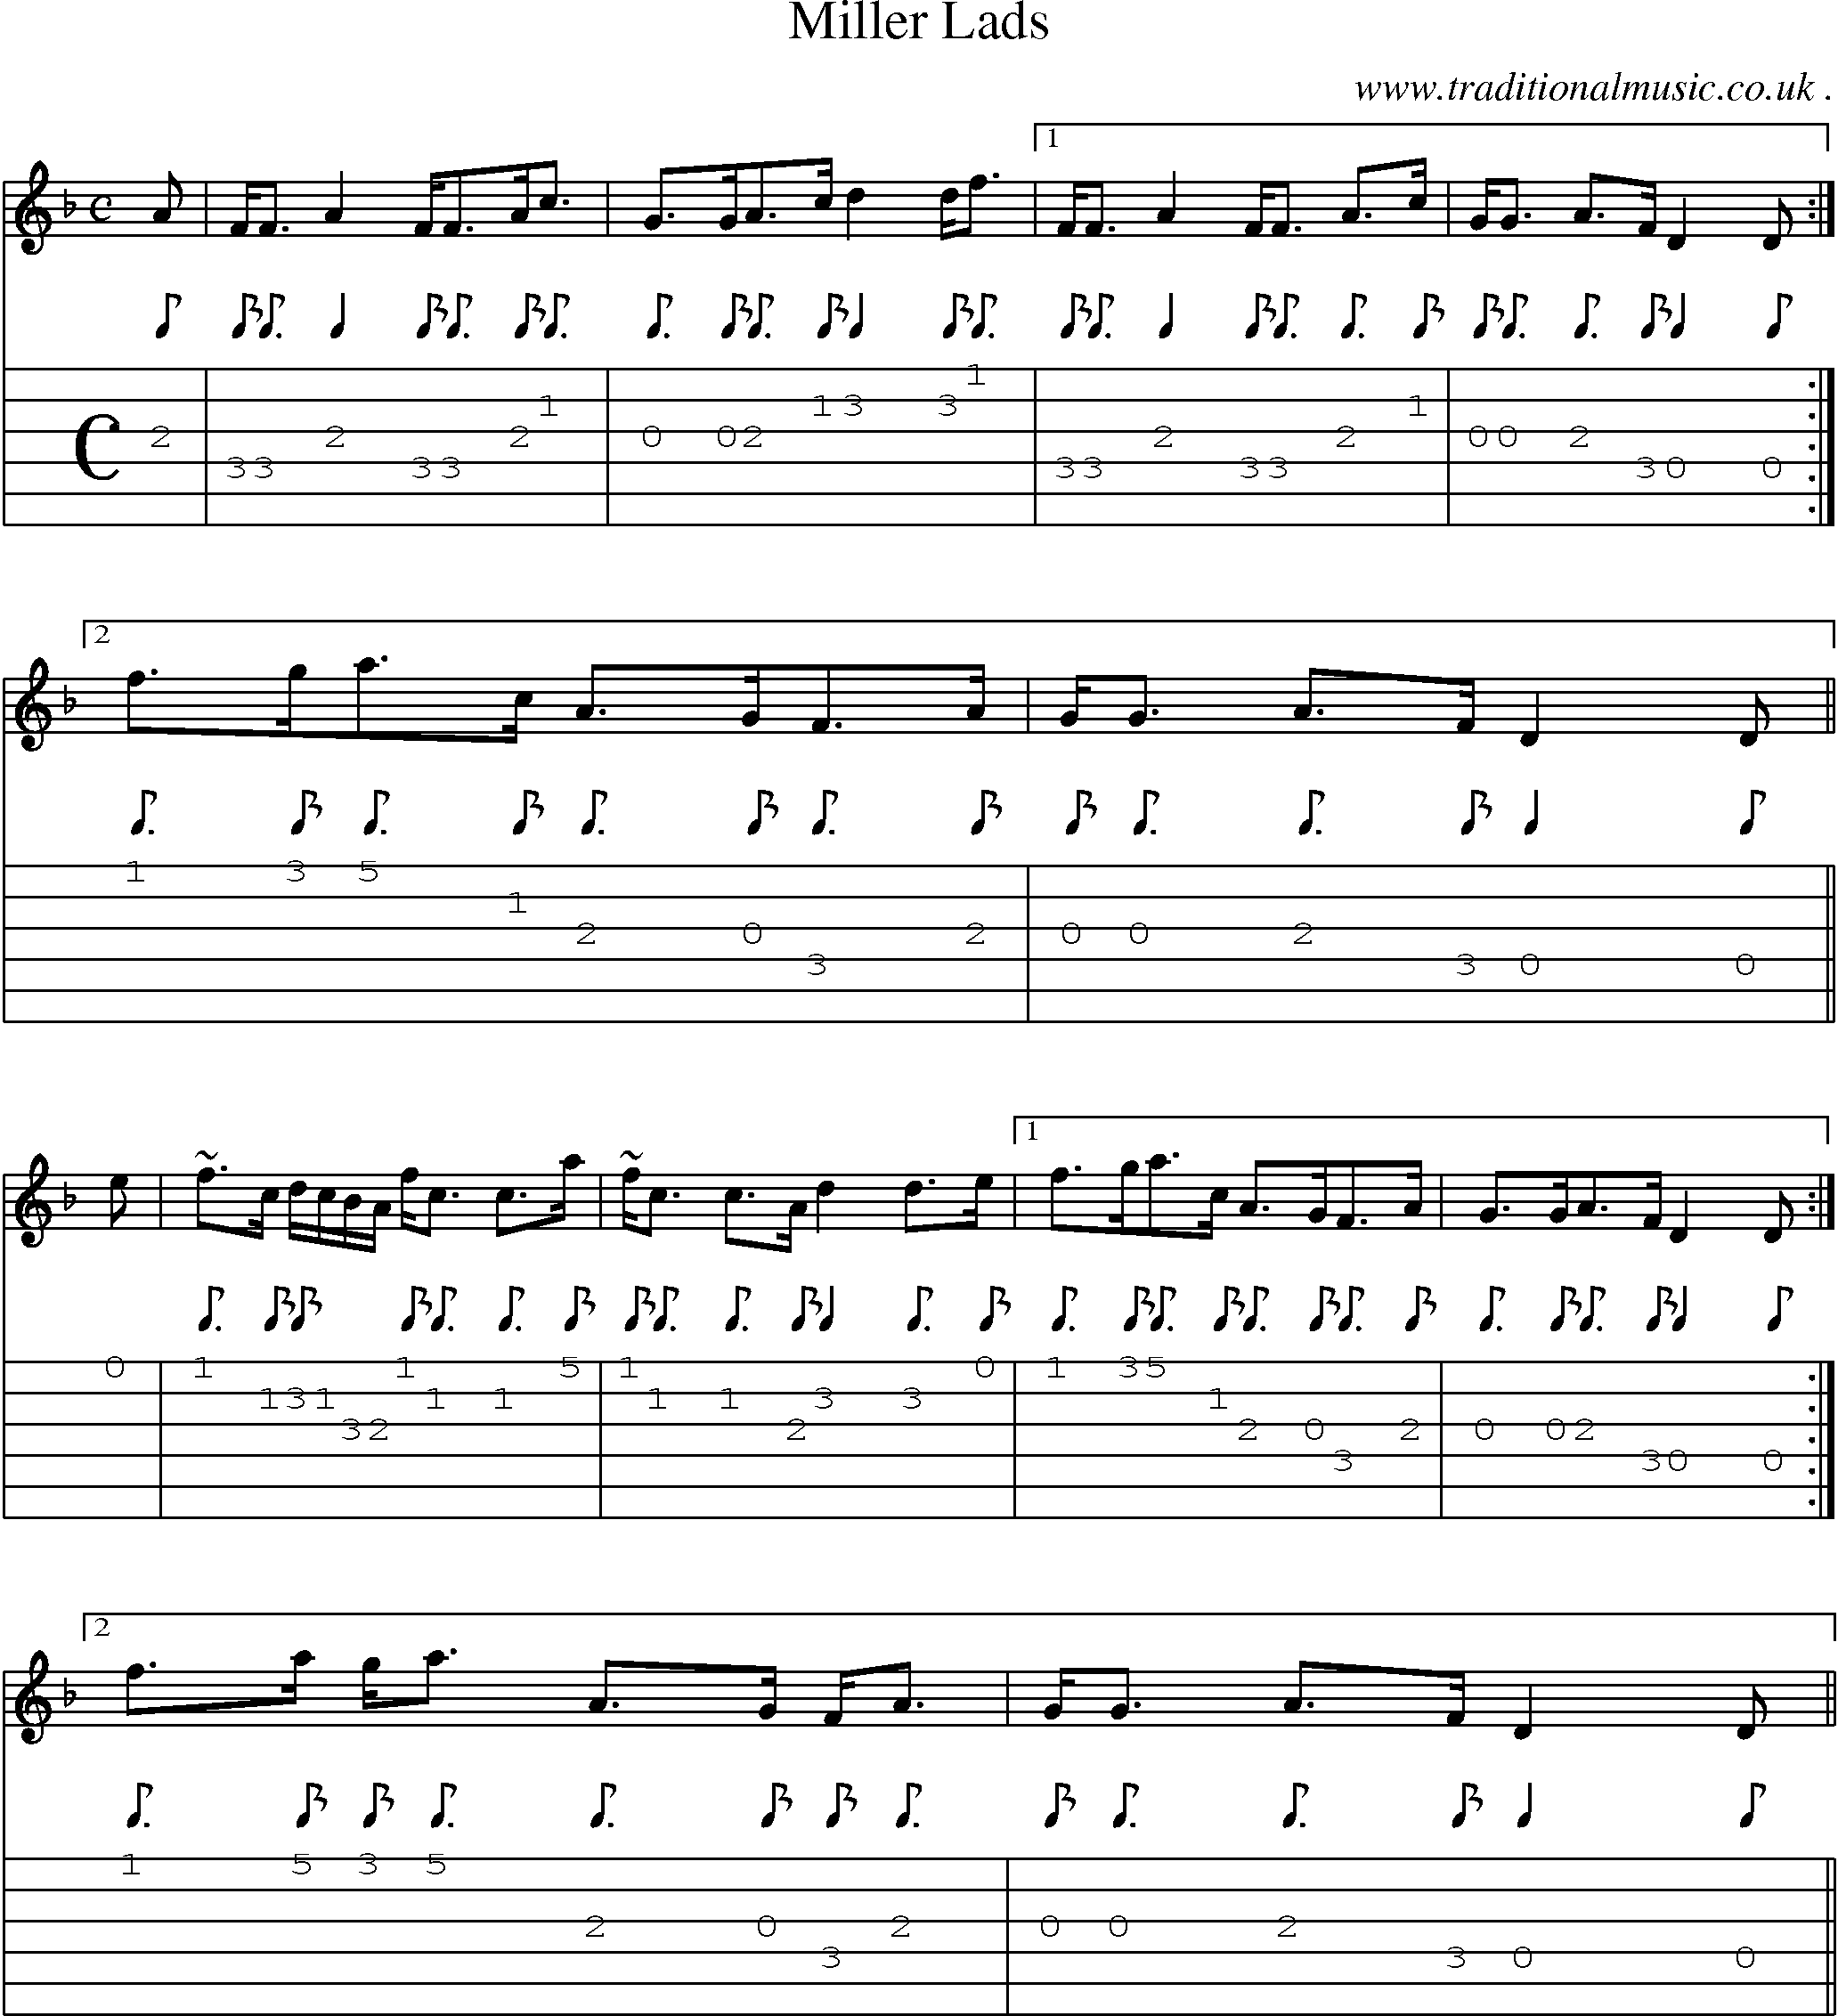 Sheet-music  score, Chords and Guitar Tabs for Miller Lads